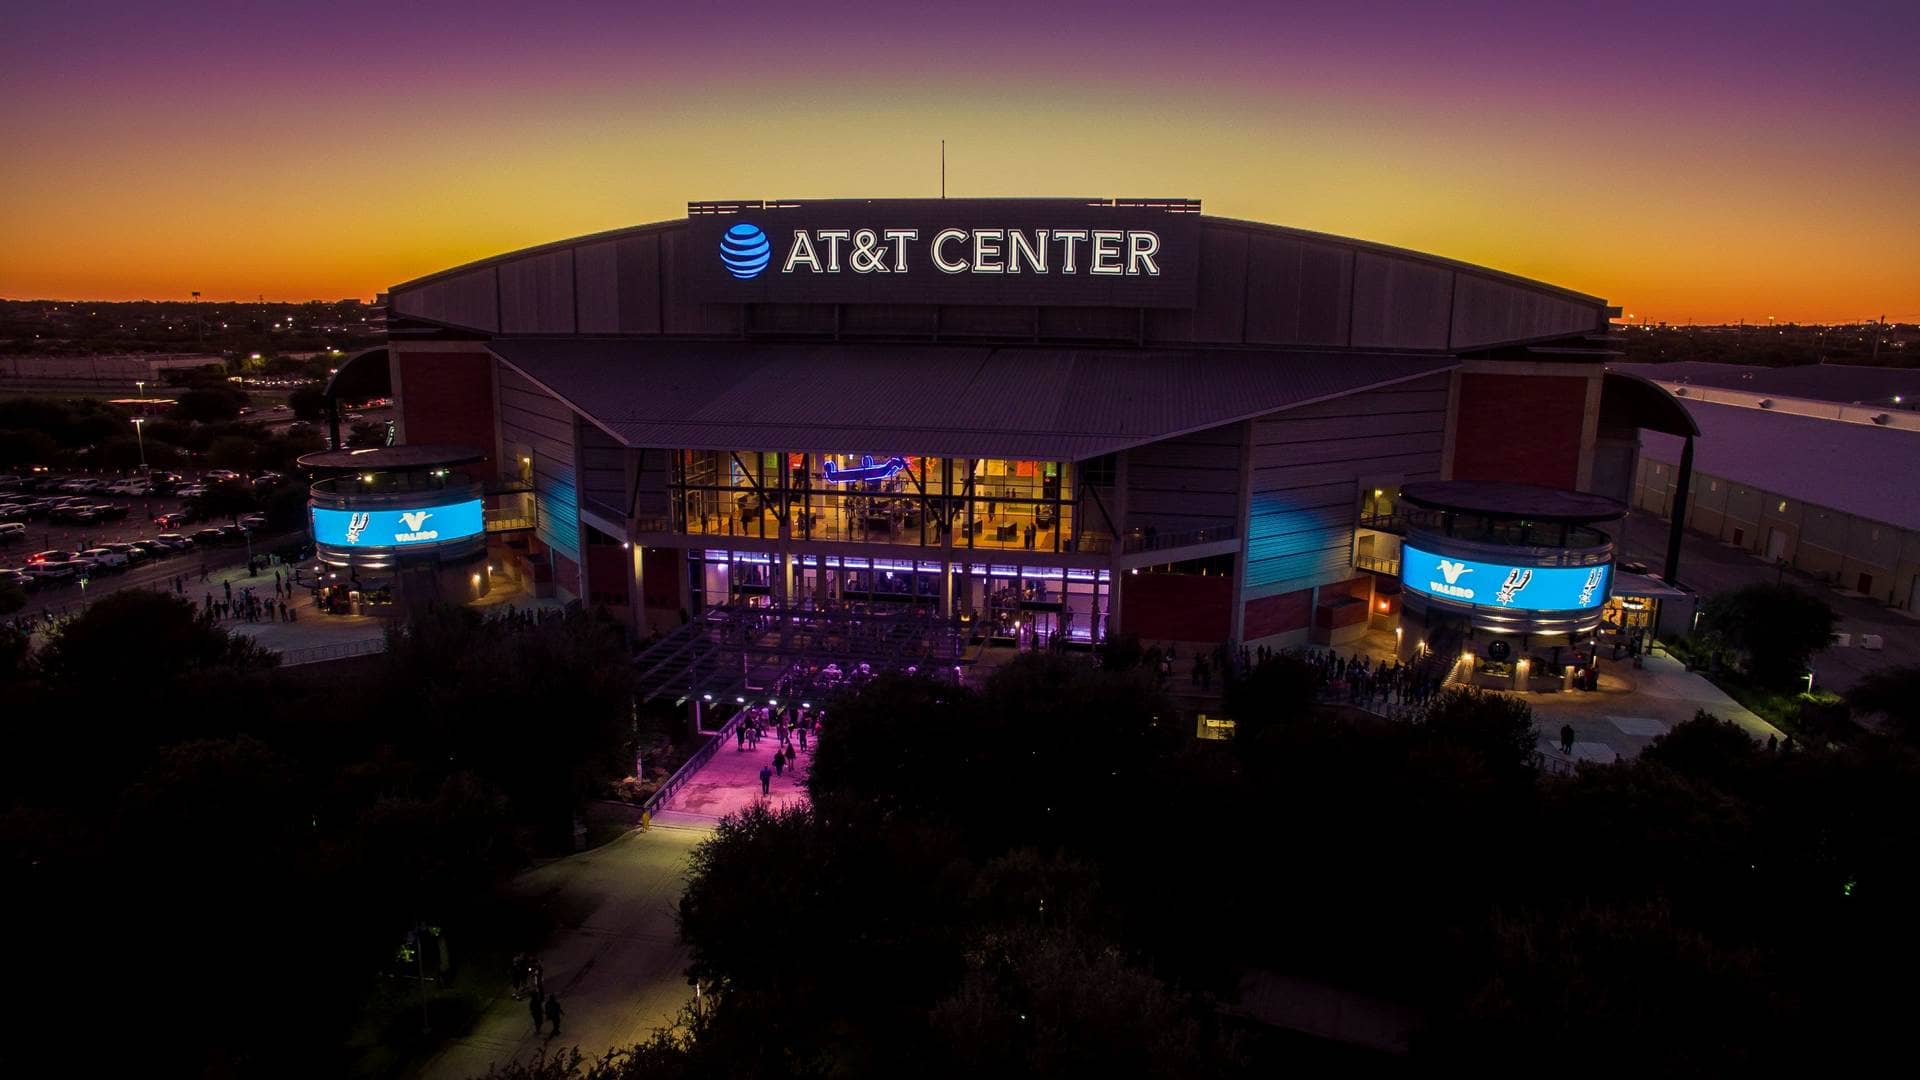 AT&T Center - Largest NBA Arena By Capacity In The World Now